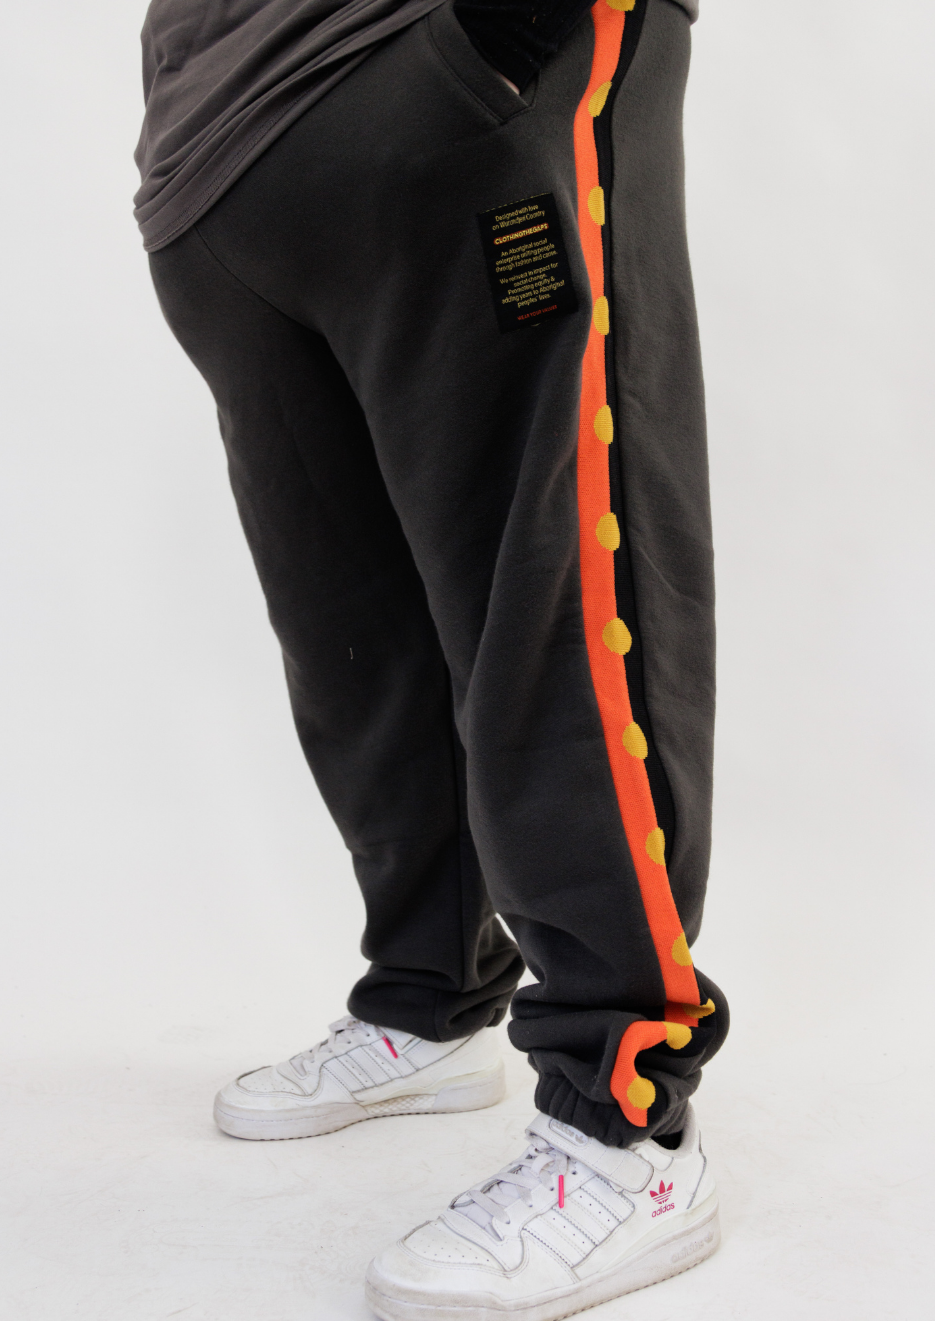 Clothing The Gaps. Charcoal Flag Track Pants. Charcoal dark grey track pants with Aboriginal flag tape down the sides. Has a elastic waist with charcoal grey draw strings and cuffed ankles.